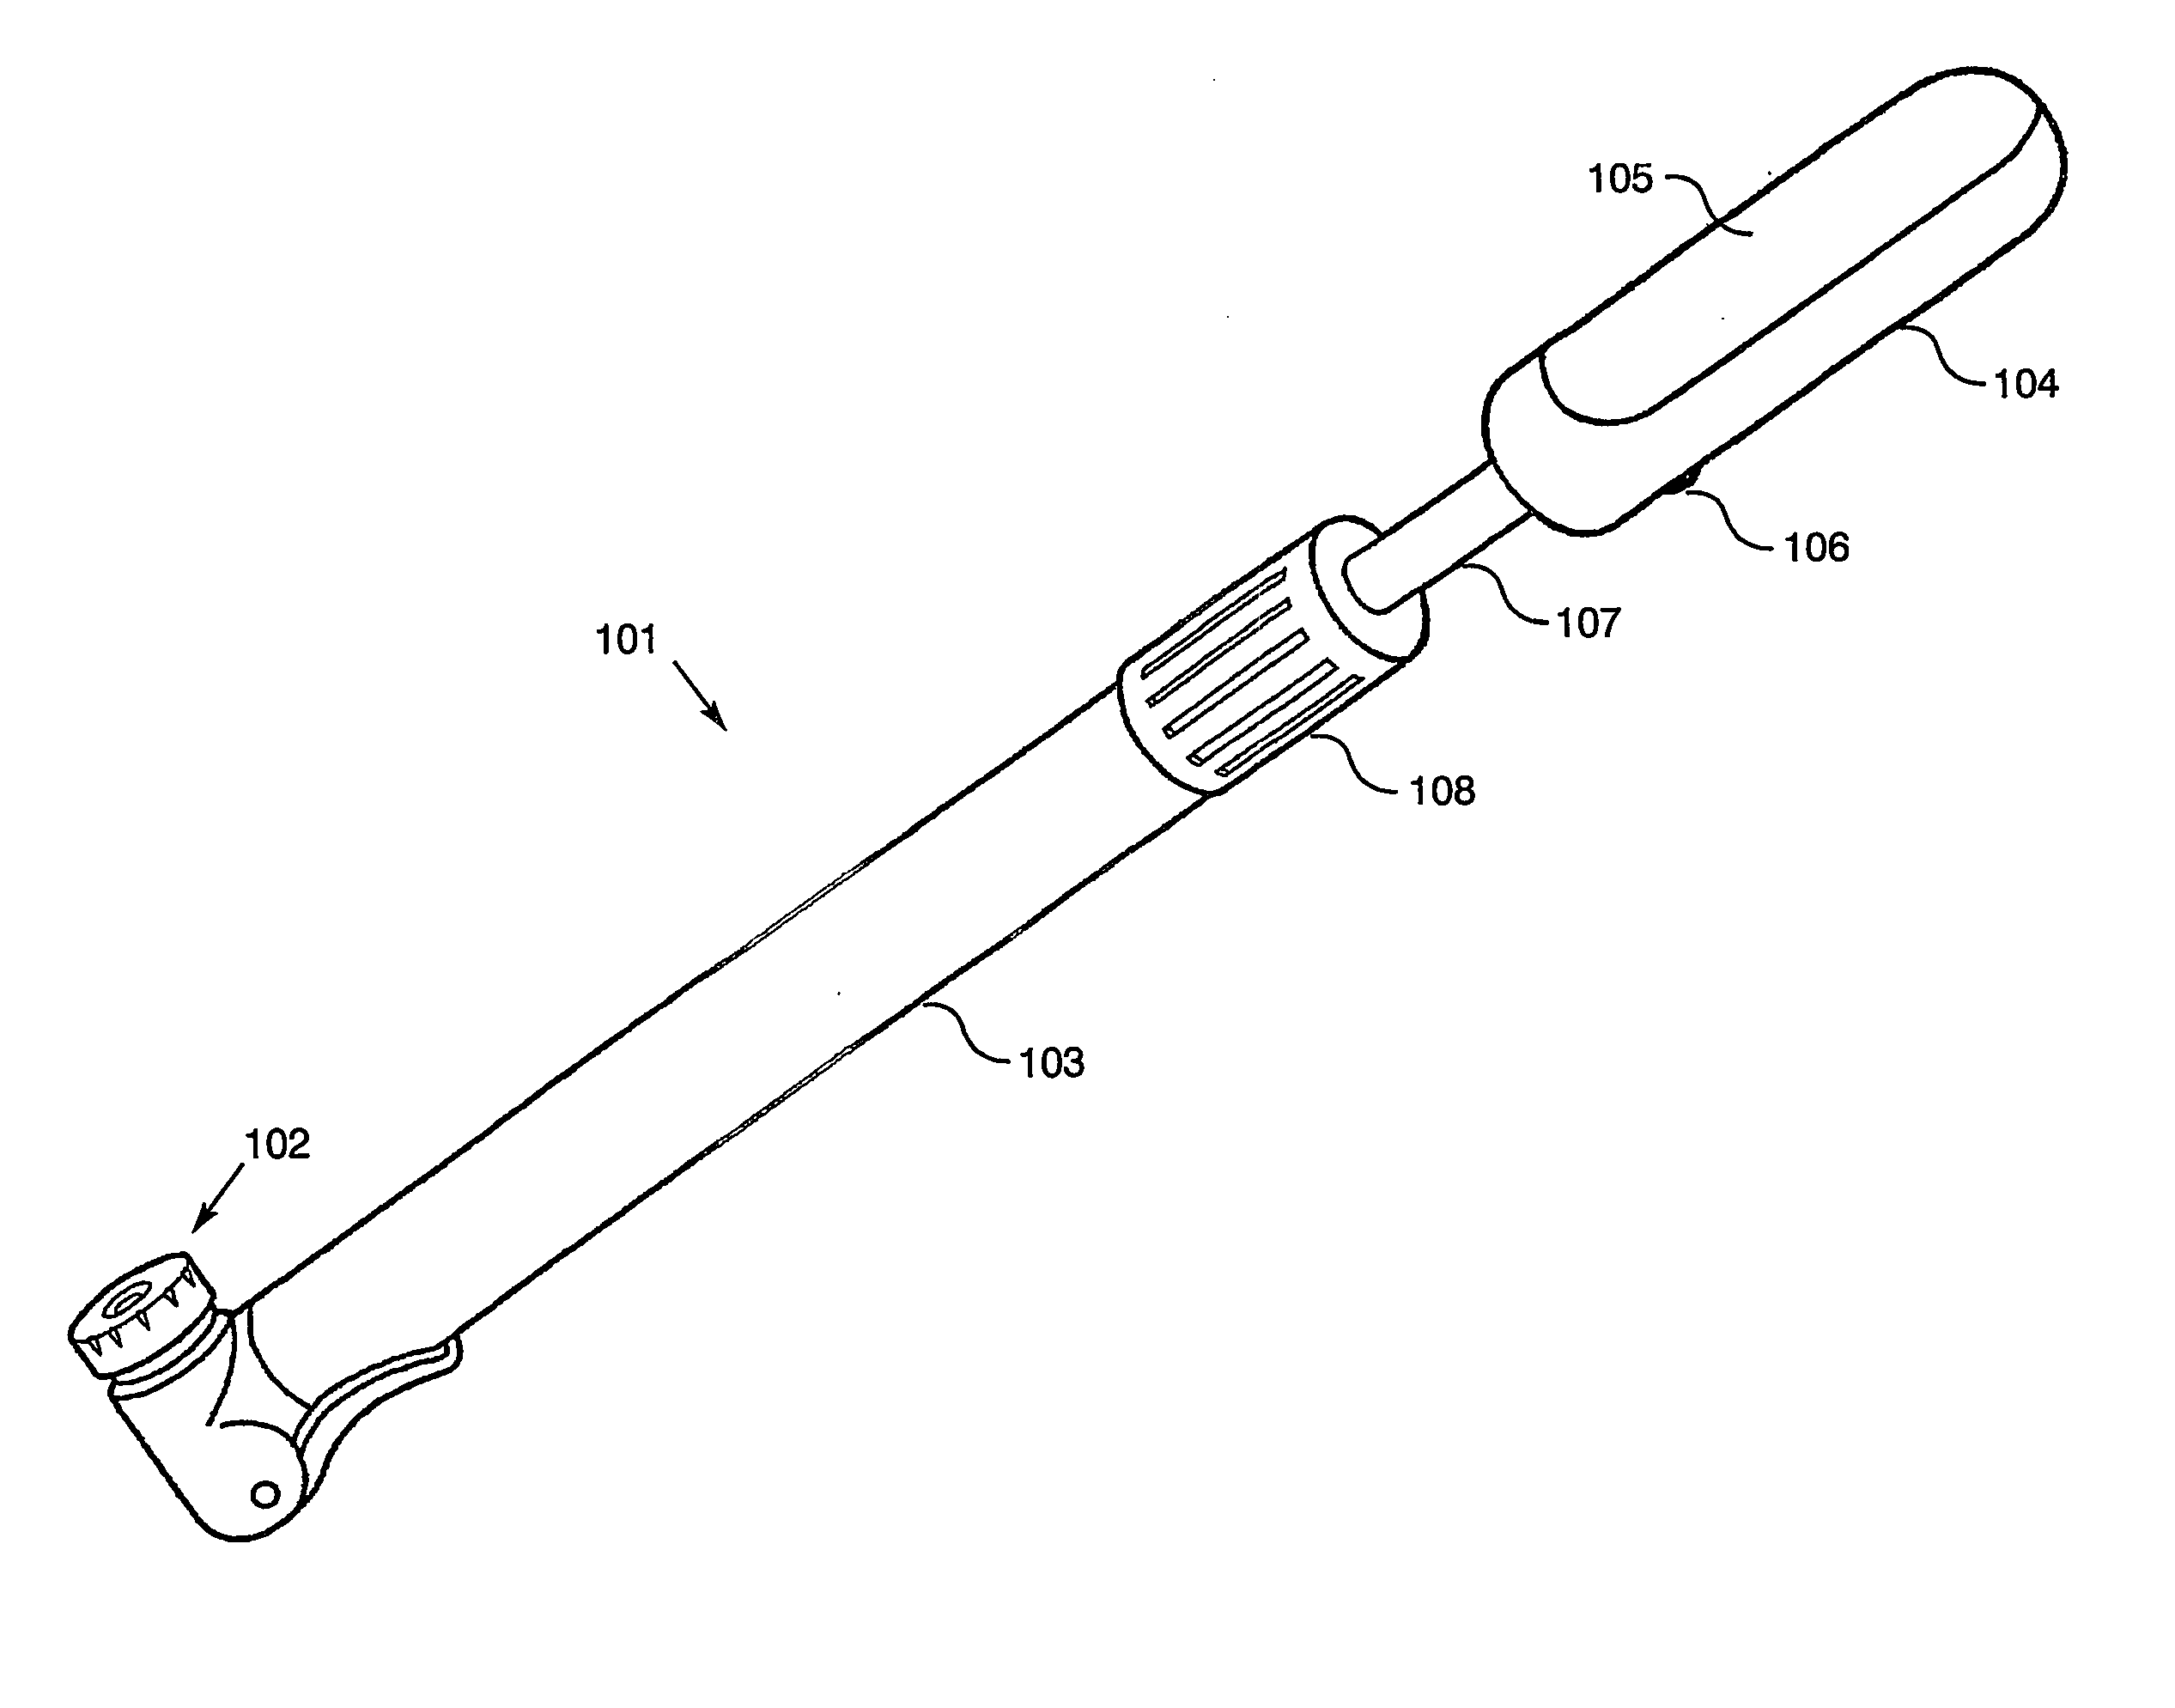 Vehicle safety warning signal devices and system for use on a bicycle, motorcycle or like vehicle